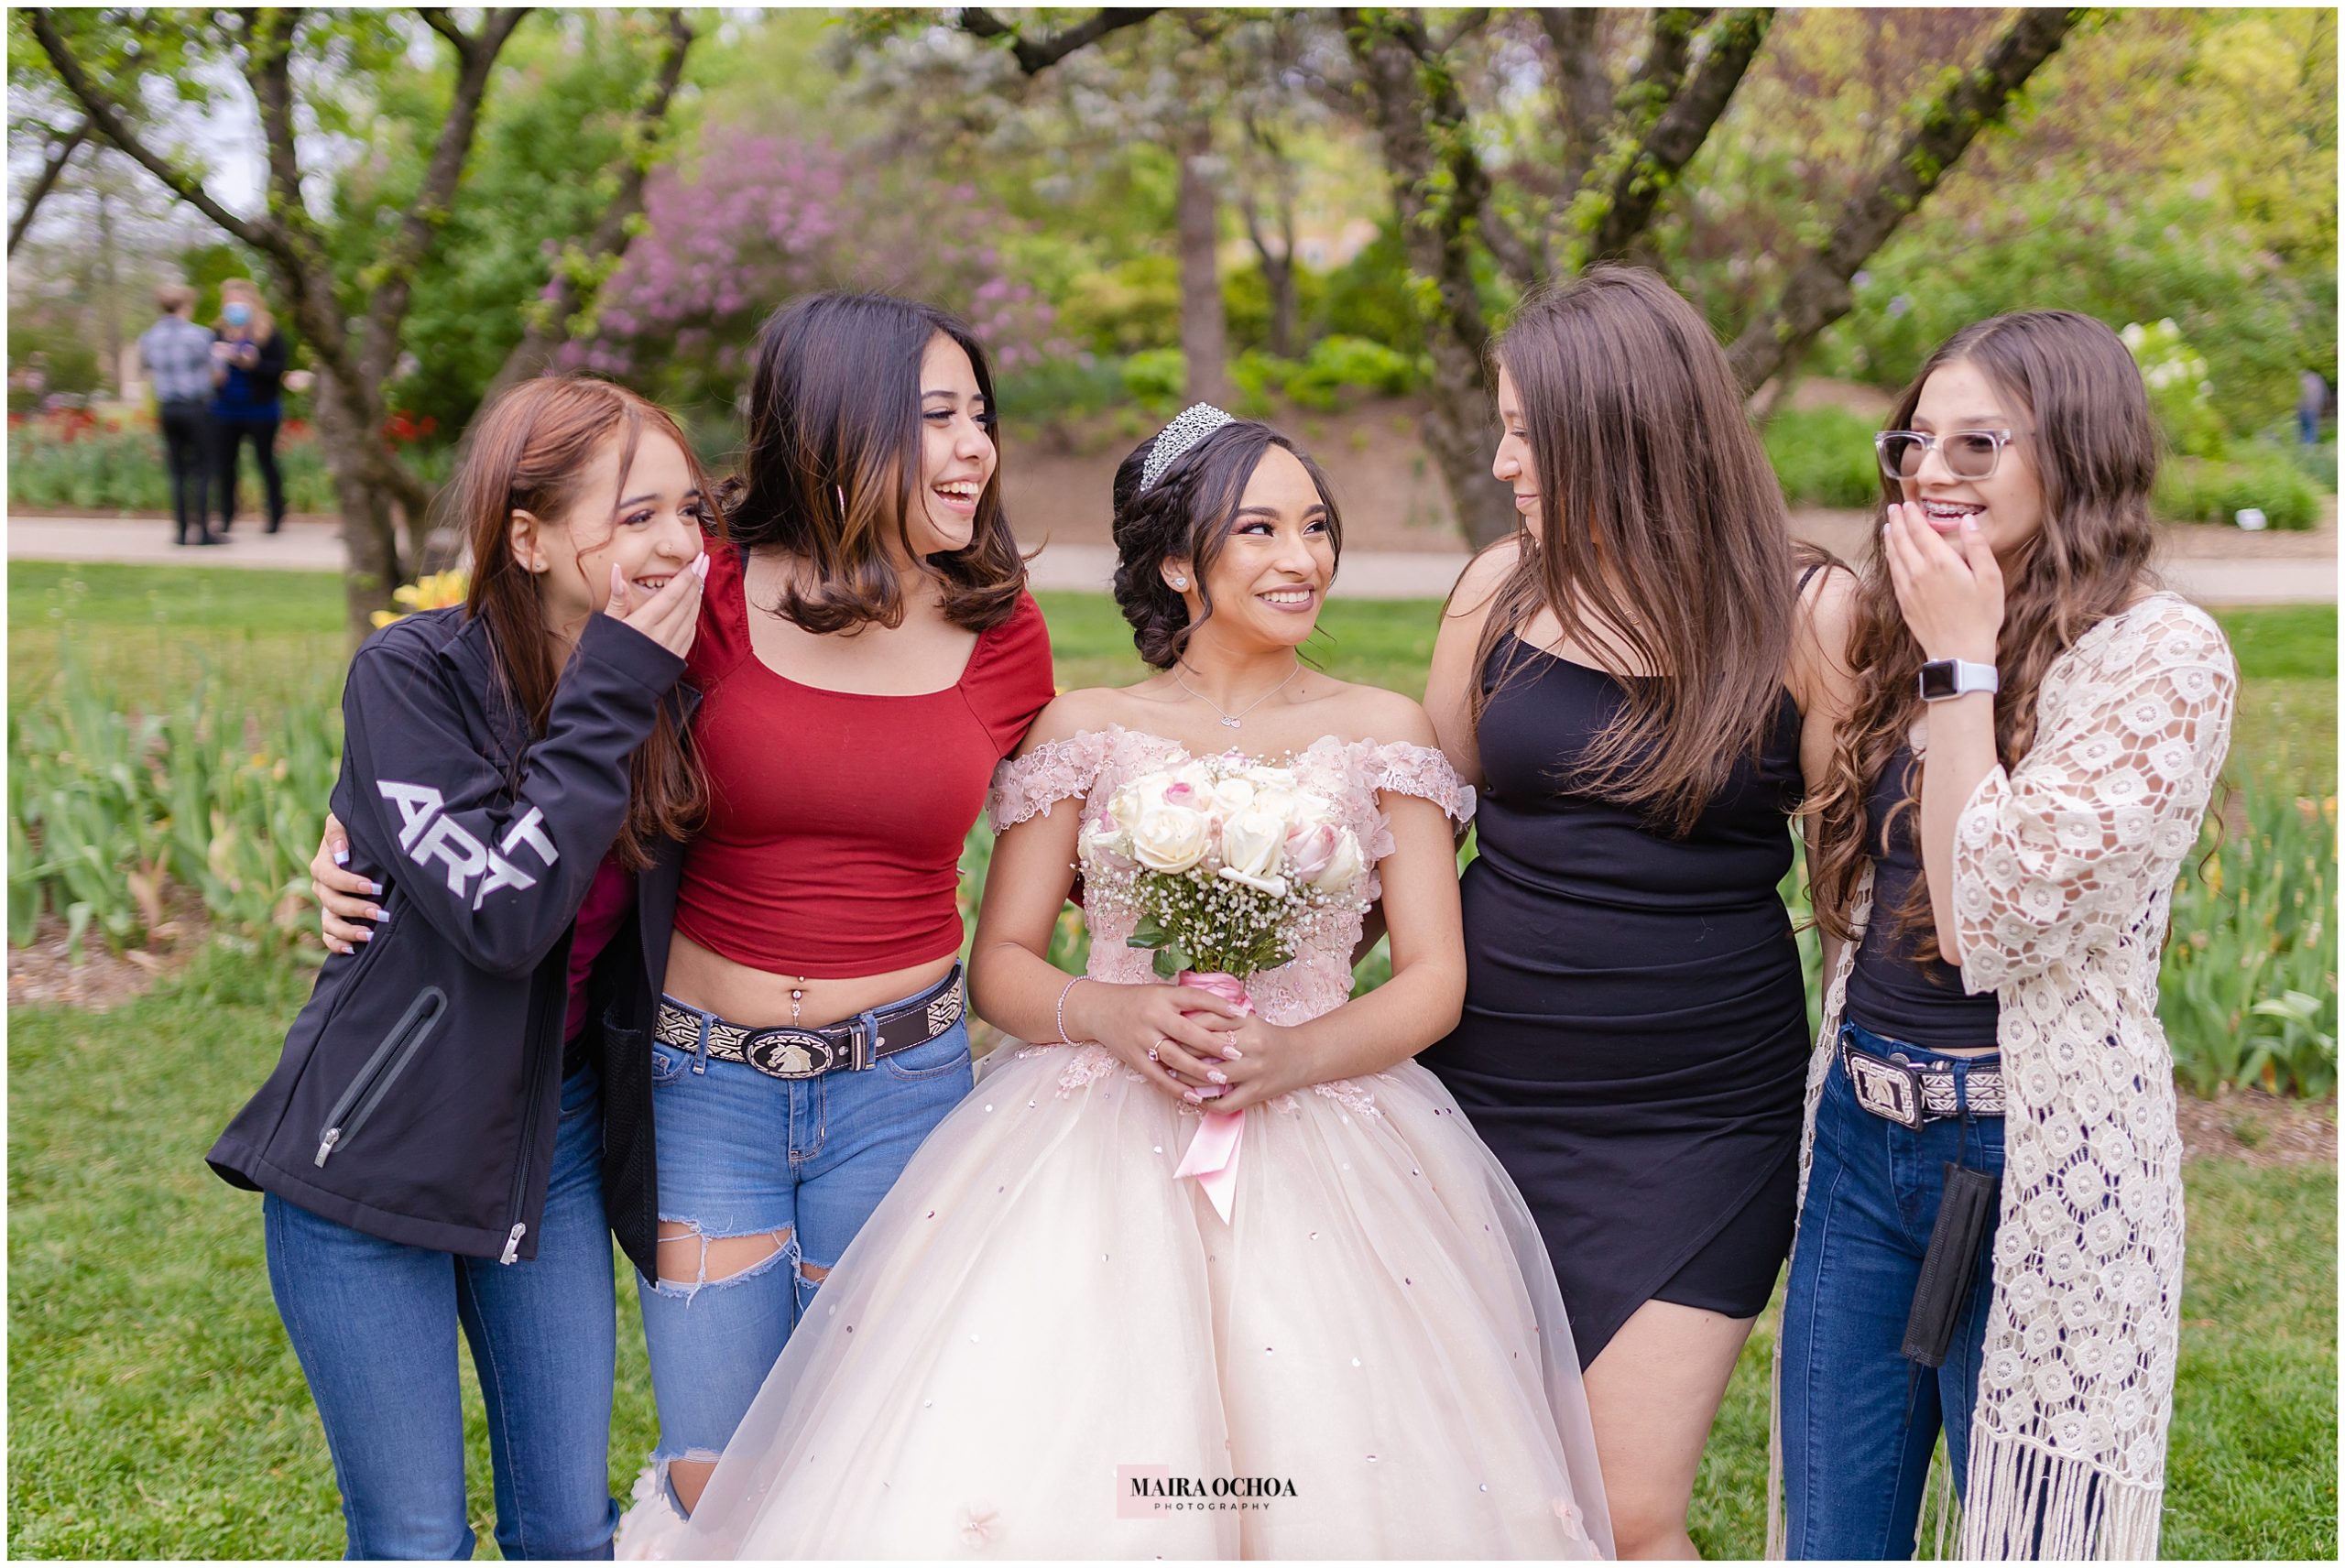 Quinceañera and her girl friends formal portraits at the Lilacia Park, Lombard IL